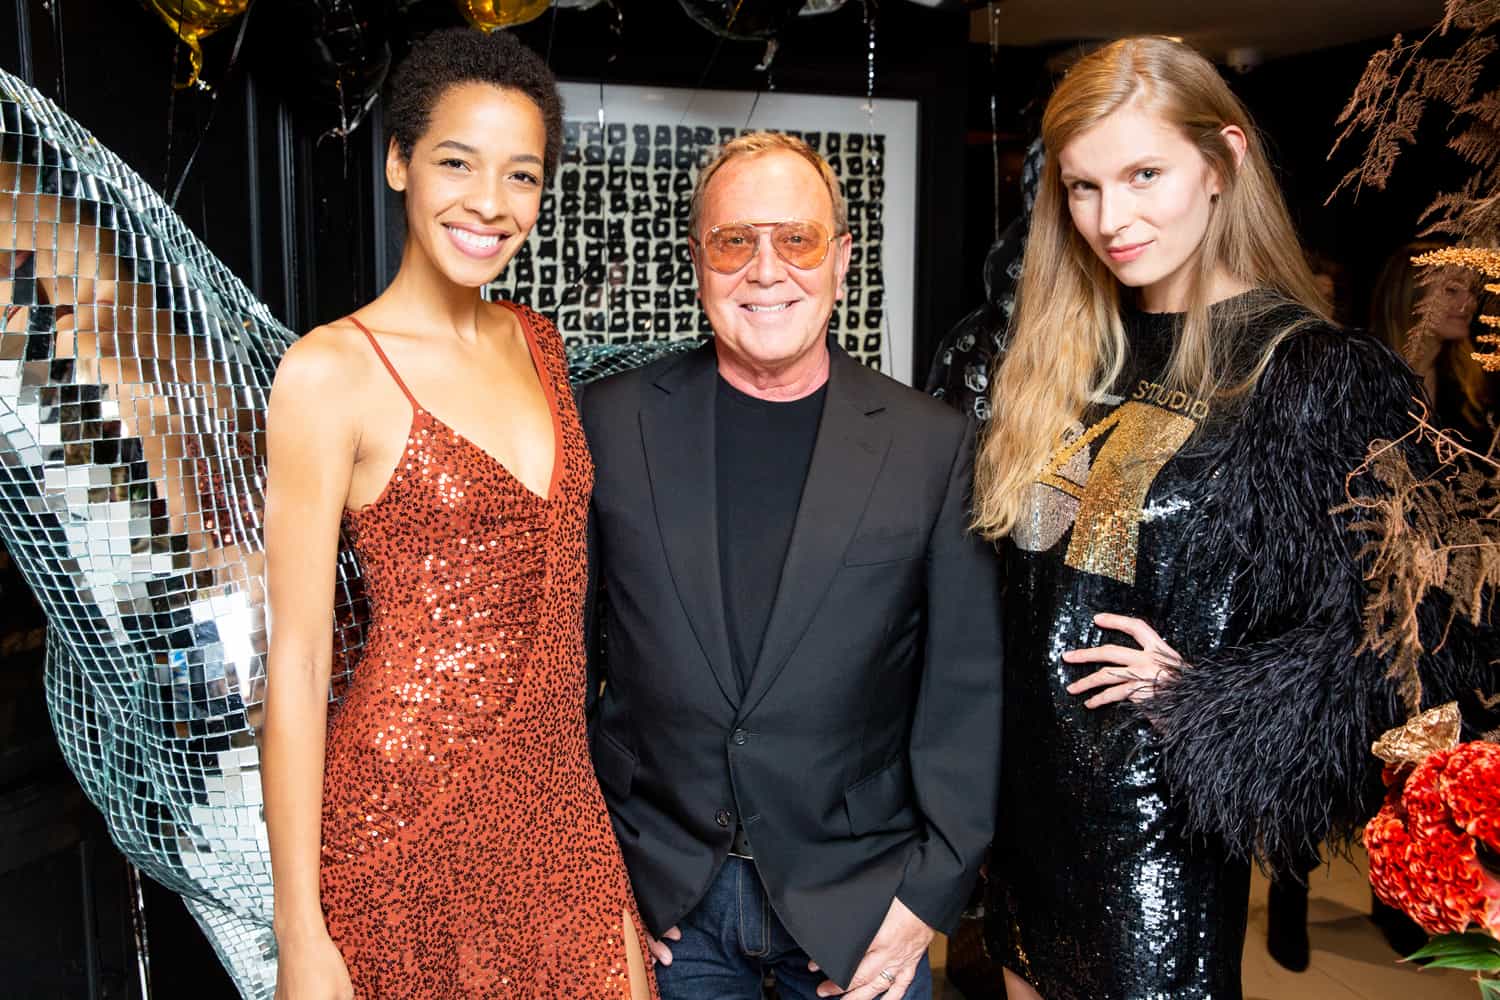 Michael Kors Hosts Game Night at Bergdorfs + More Chic Events